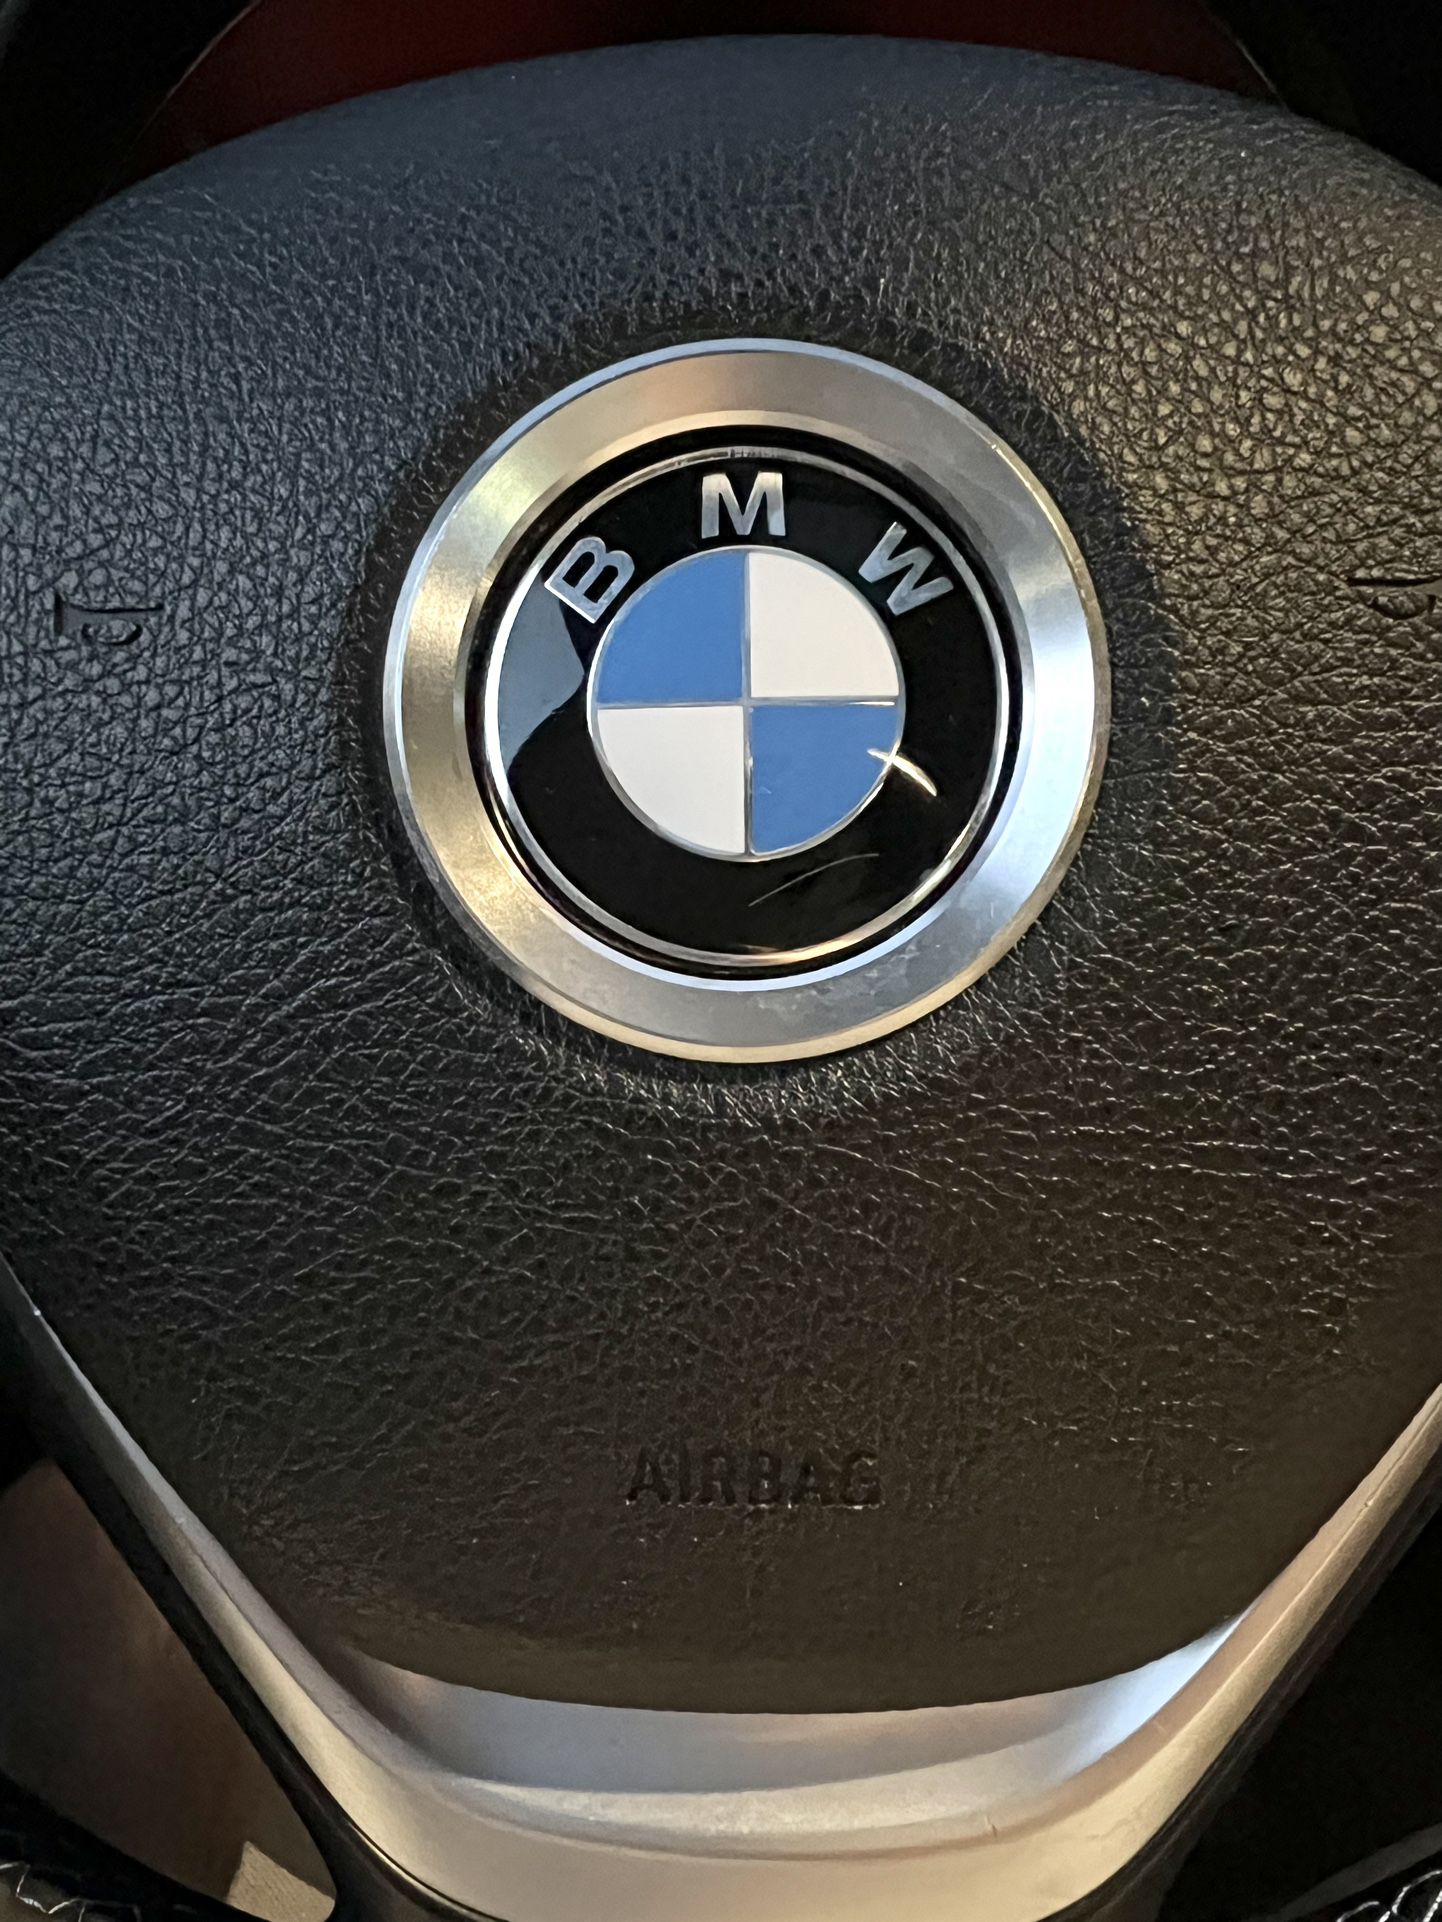 🌐 Genuine BMW F30 3 Series (2017) Steering Wheel (Used)  This is a GENUINE BMW Leather F30 Steering Wheel which came from a 2017 330i Sedan. It is bl